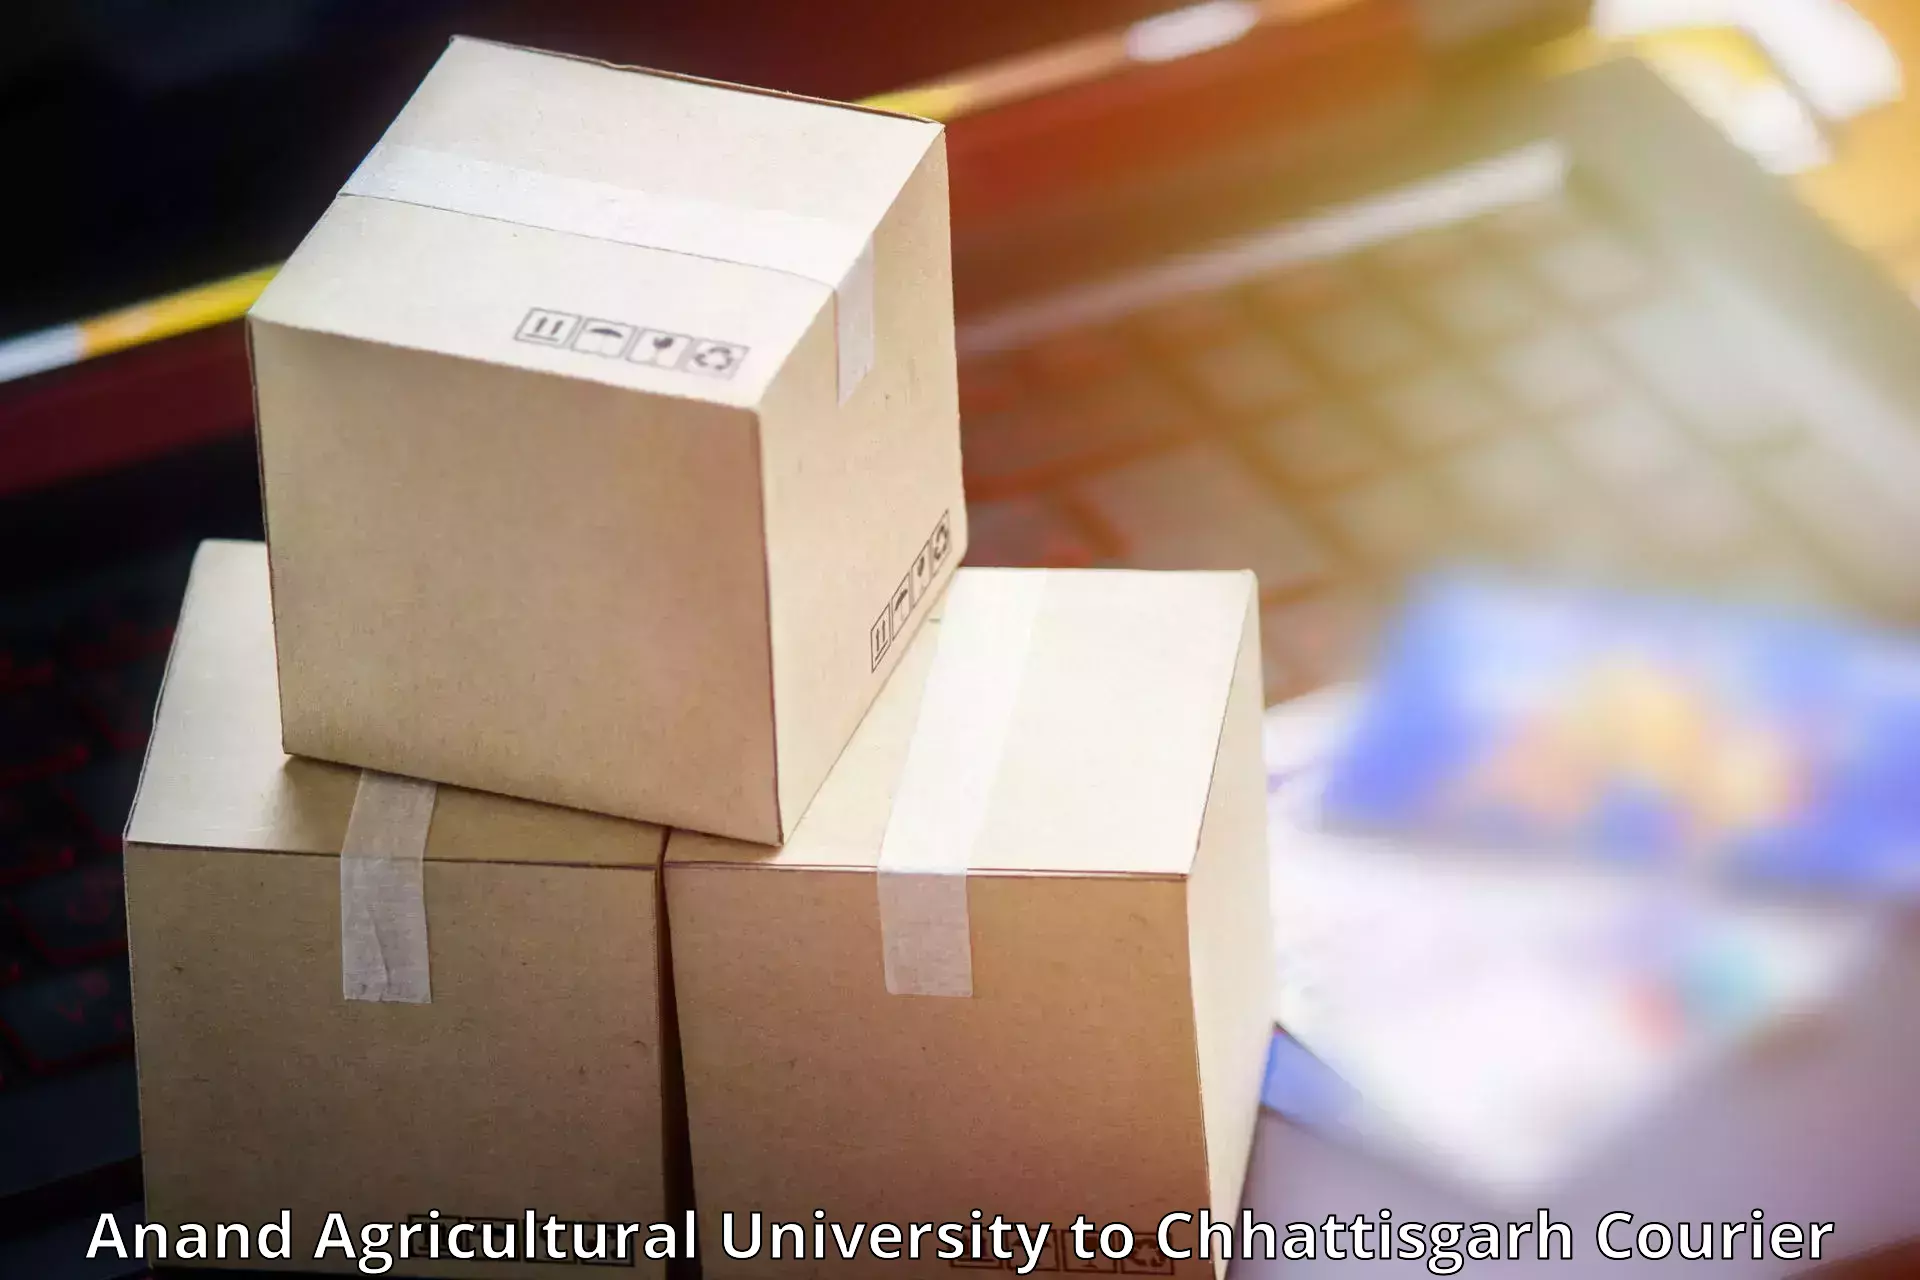 High-capacity parcel service Anand Agricultural University to Wadrafnagar